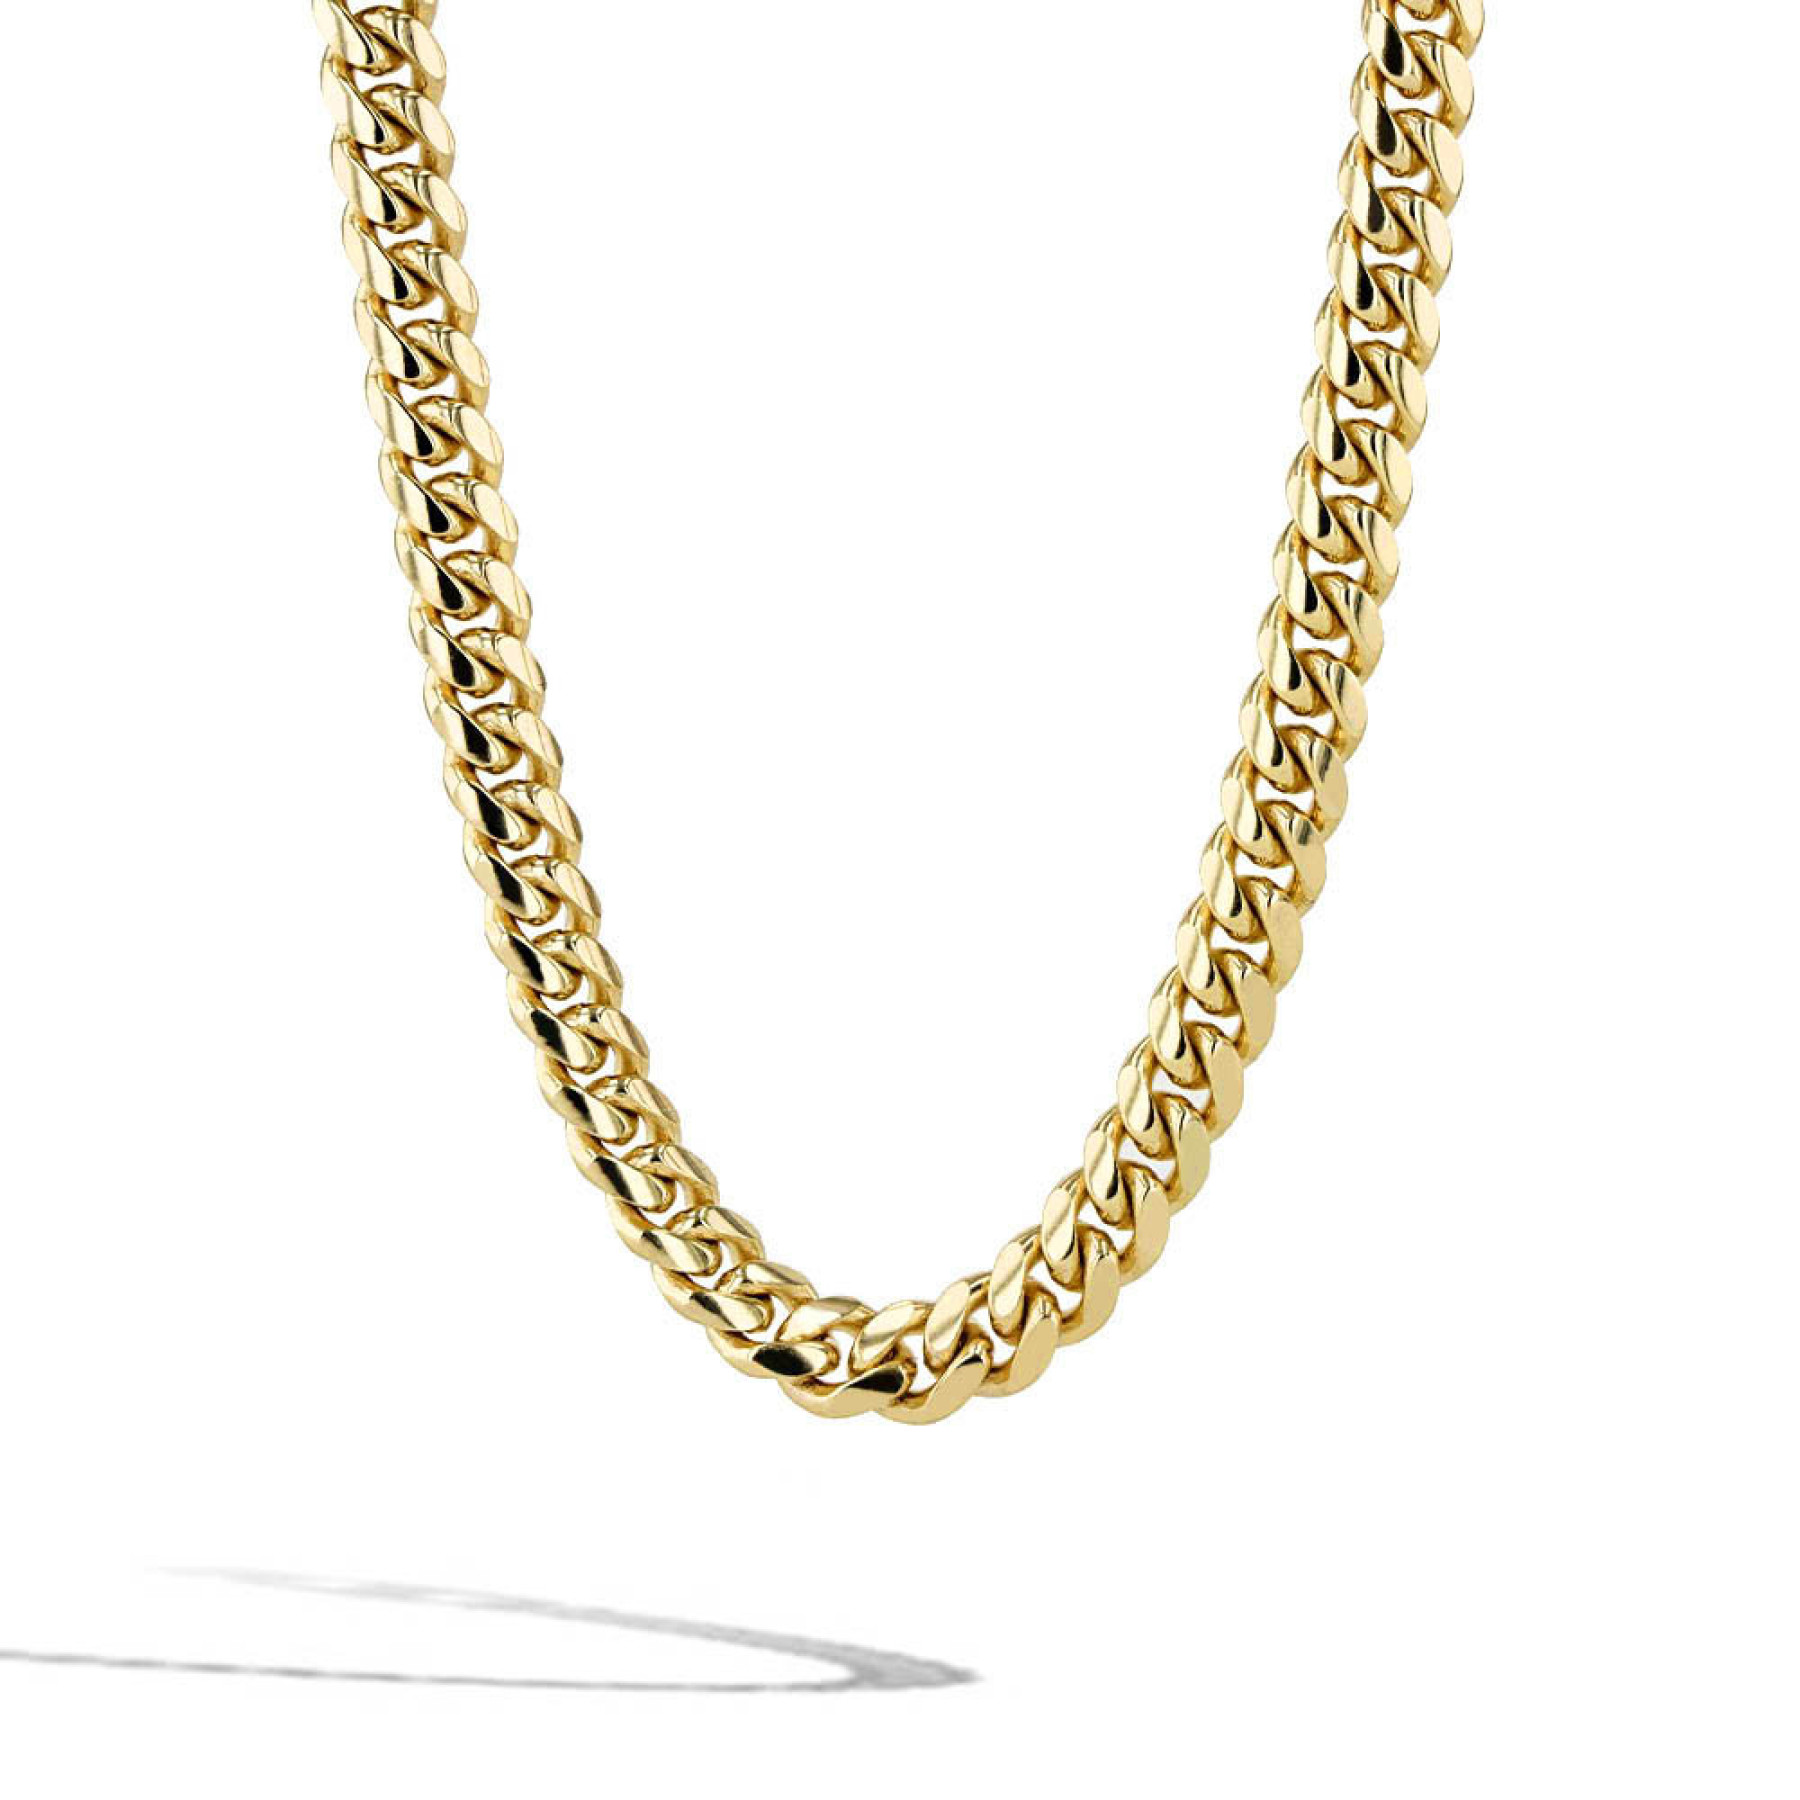 36" GOLD EP MENS 9MM TEXTURED CUBAN LINK NECKLACE CHAIN 